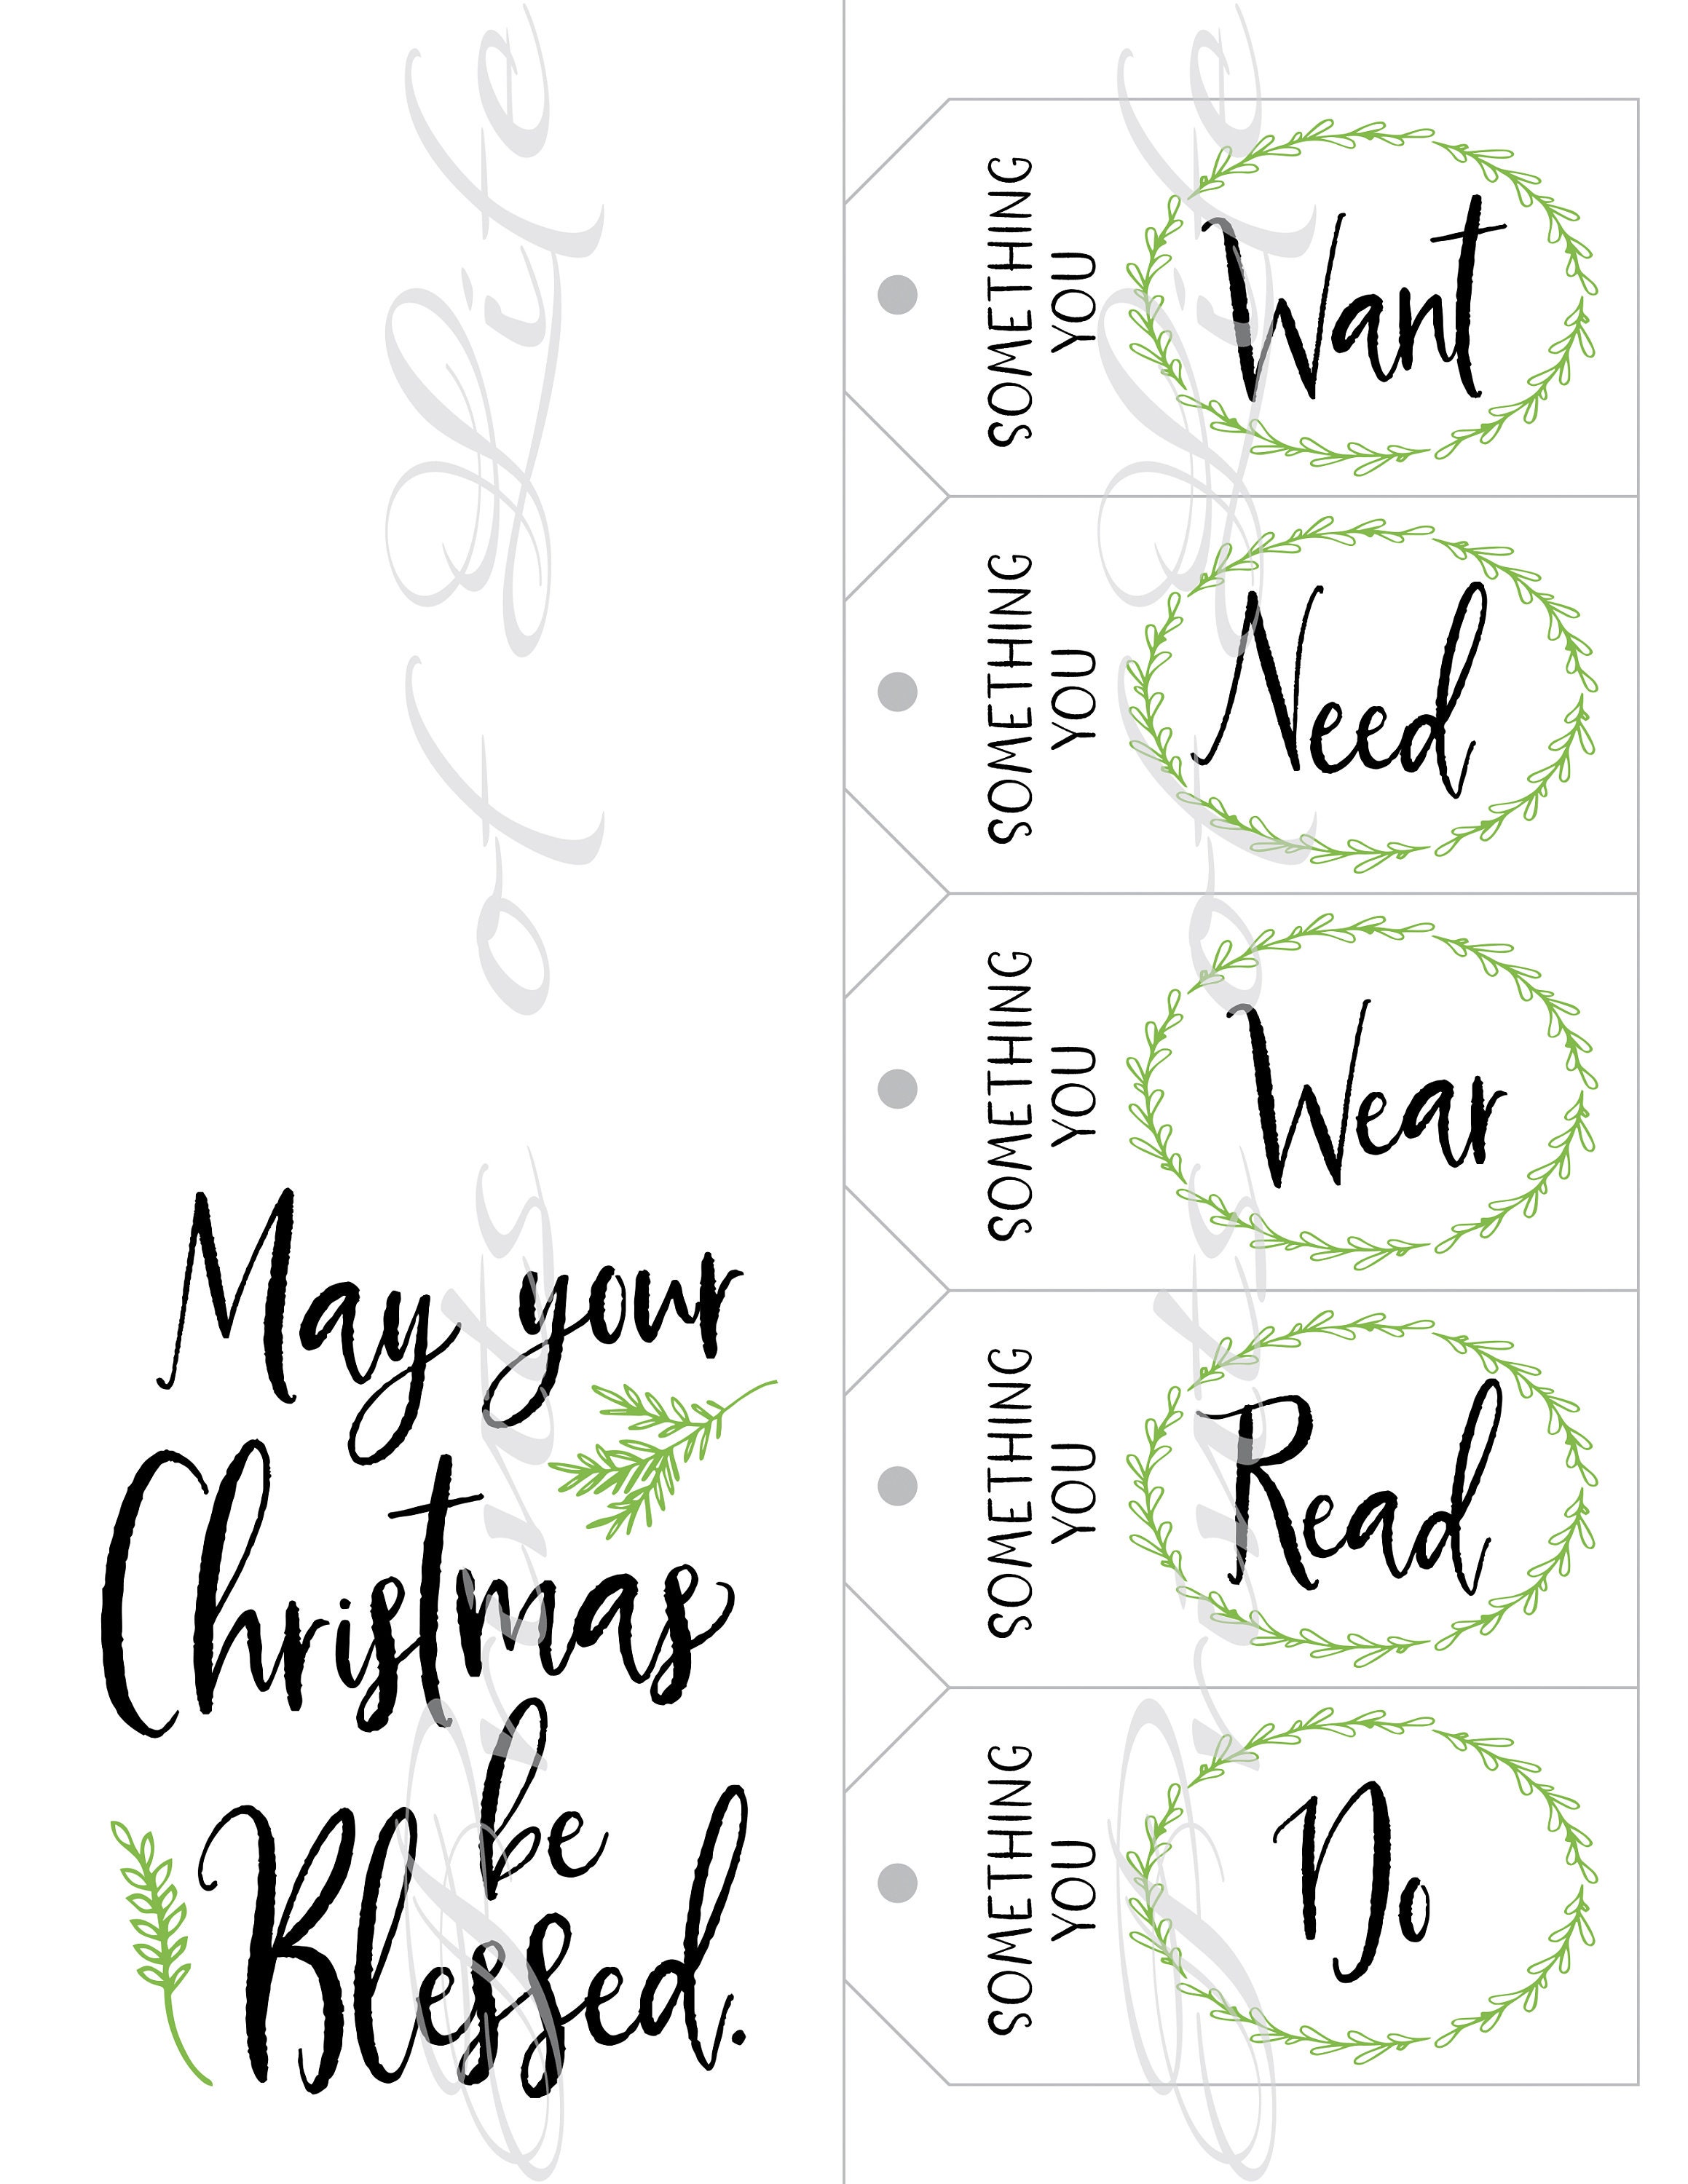 Five Senses Gift Tags & Card. 5 Senses Instant Download Printable. Perfect  Sense Print. Christmas Gift for Him Her. Valentines Day. Birthday 